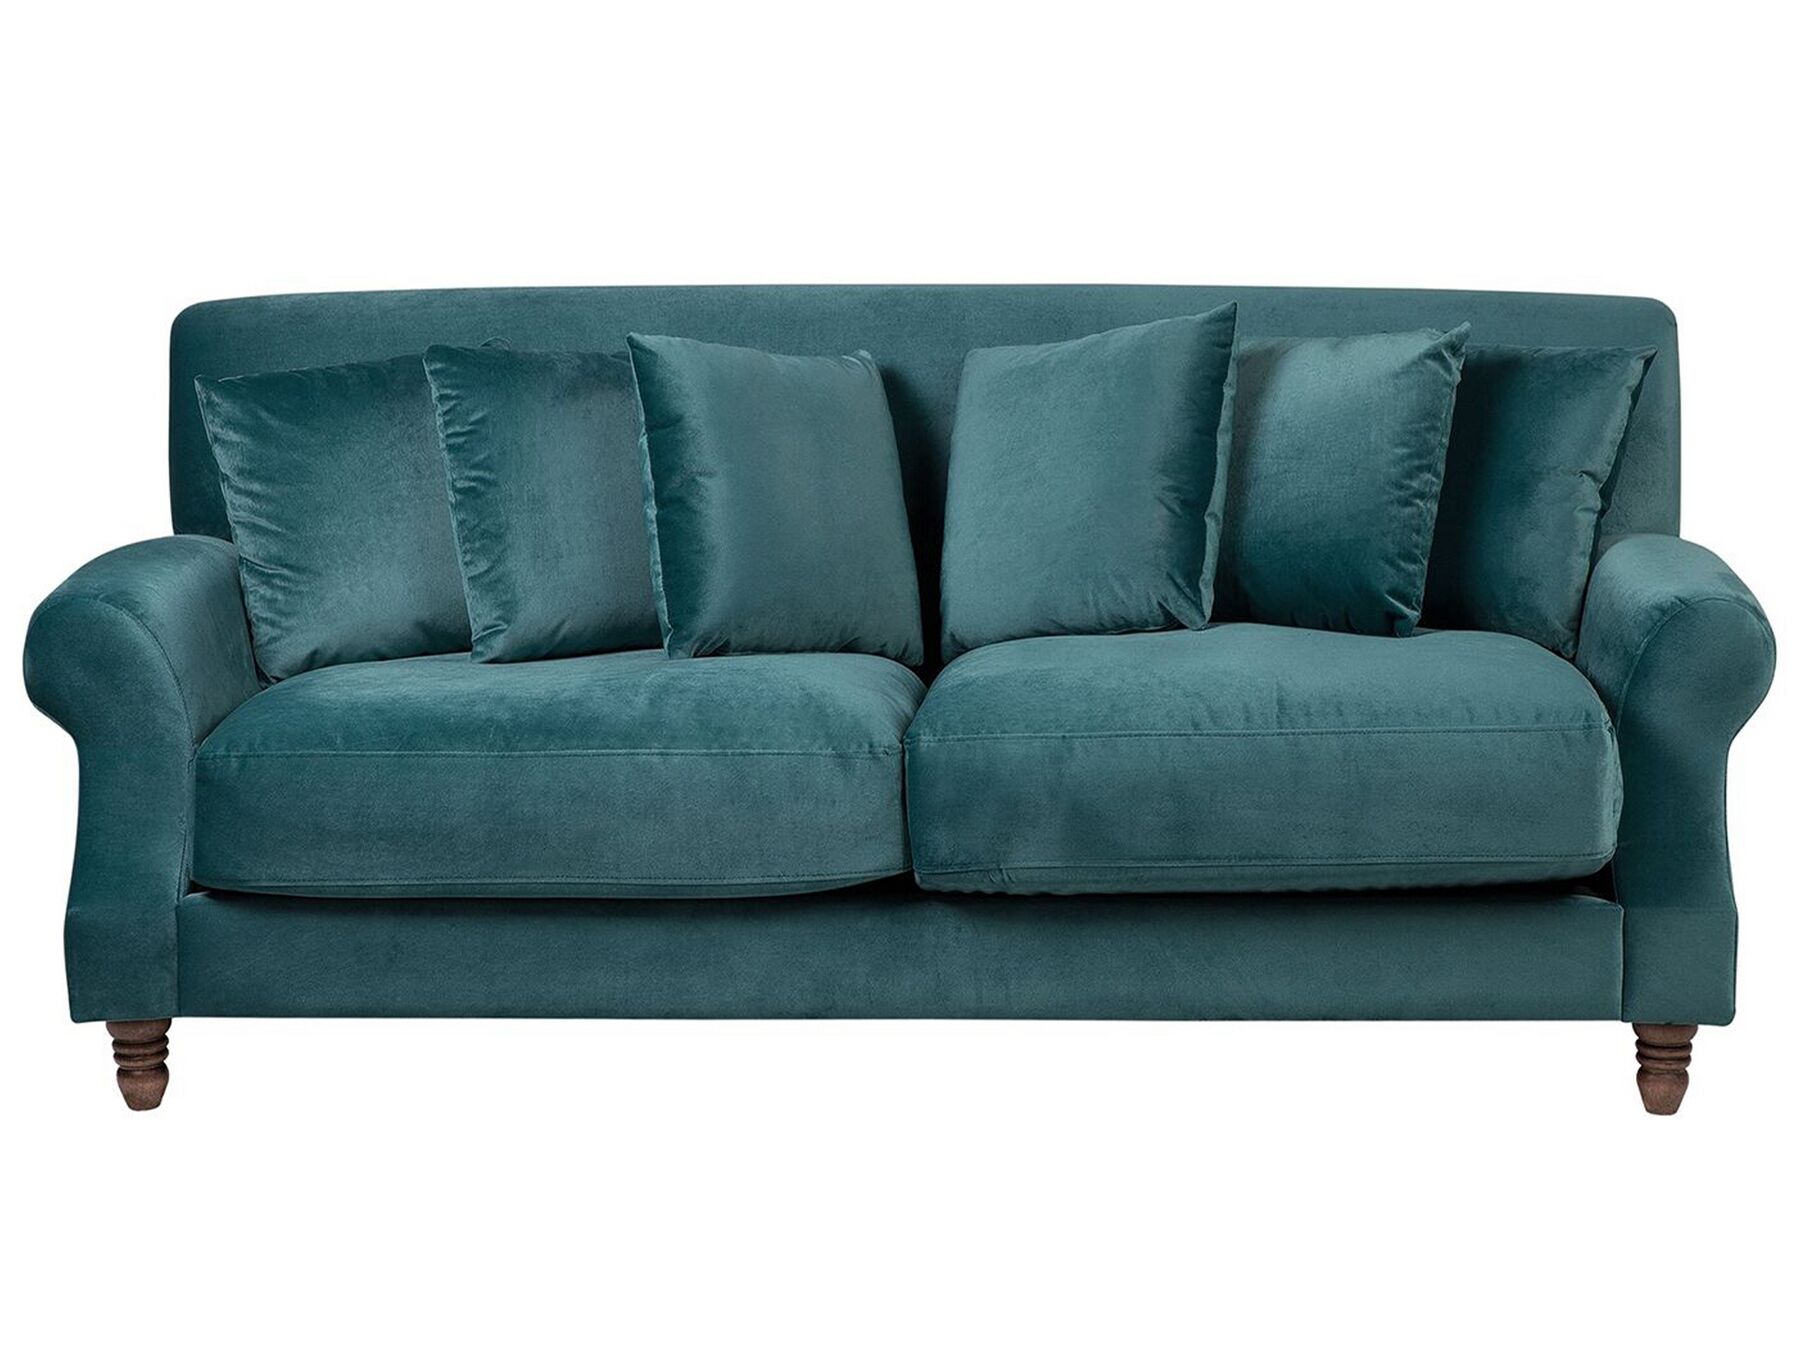 teal sofa bed with storage